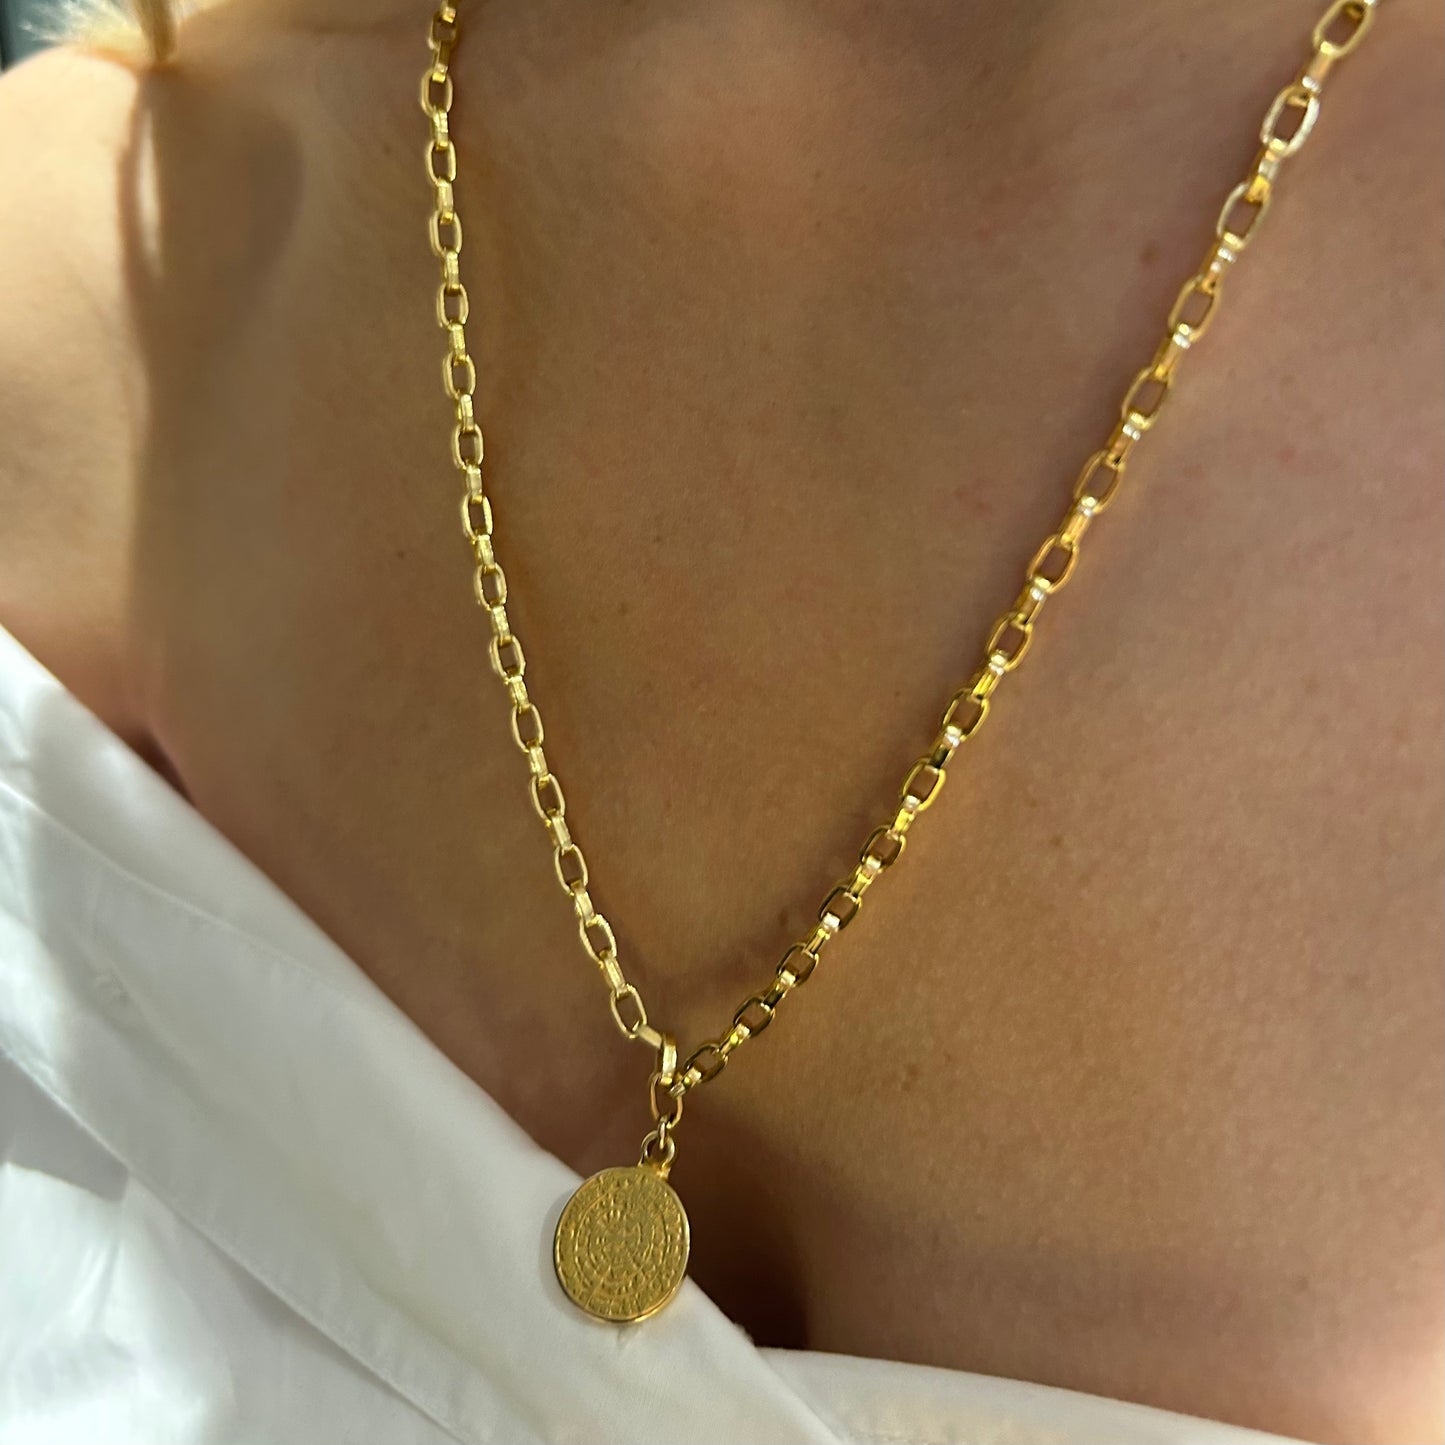 Thick tight knit 14k gold filled chain with Ancient Greek medallion